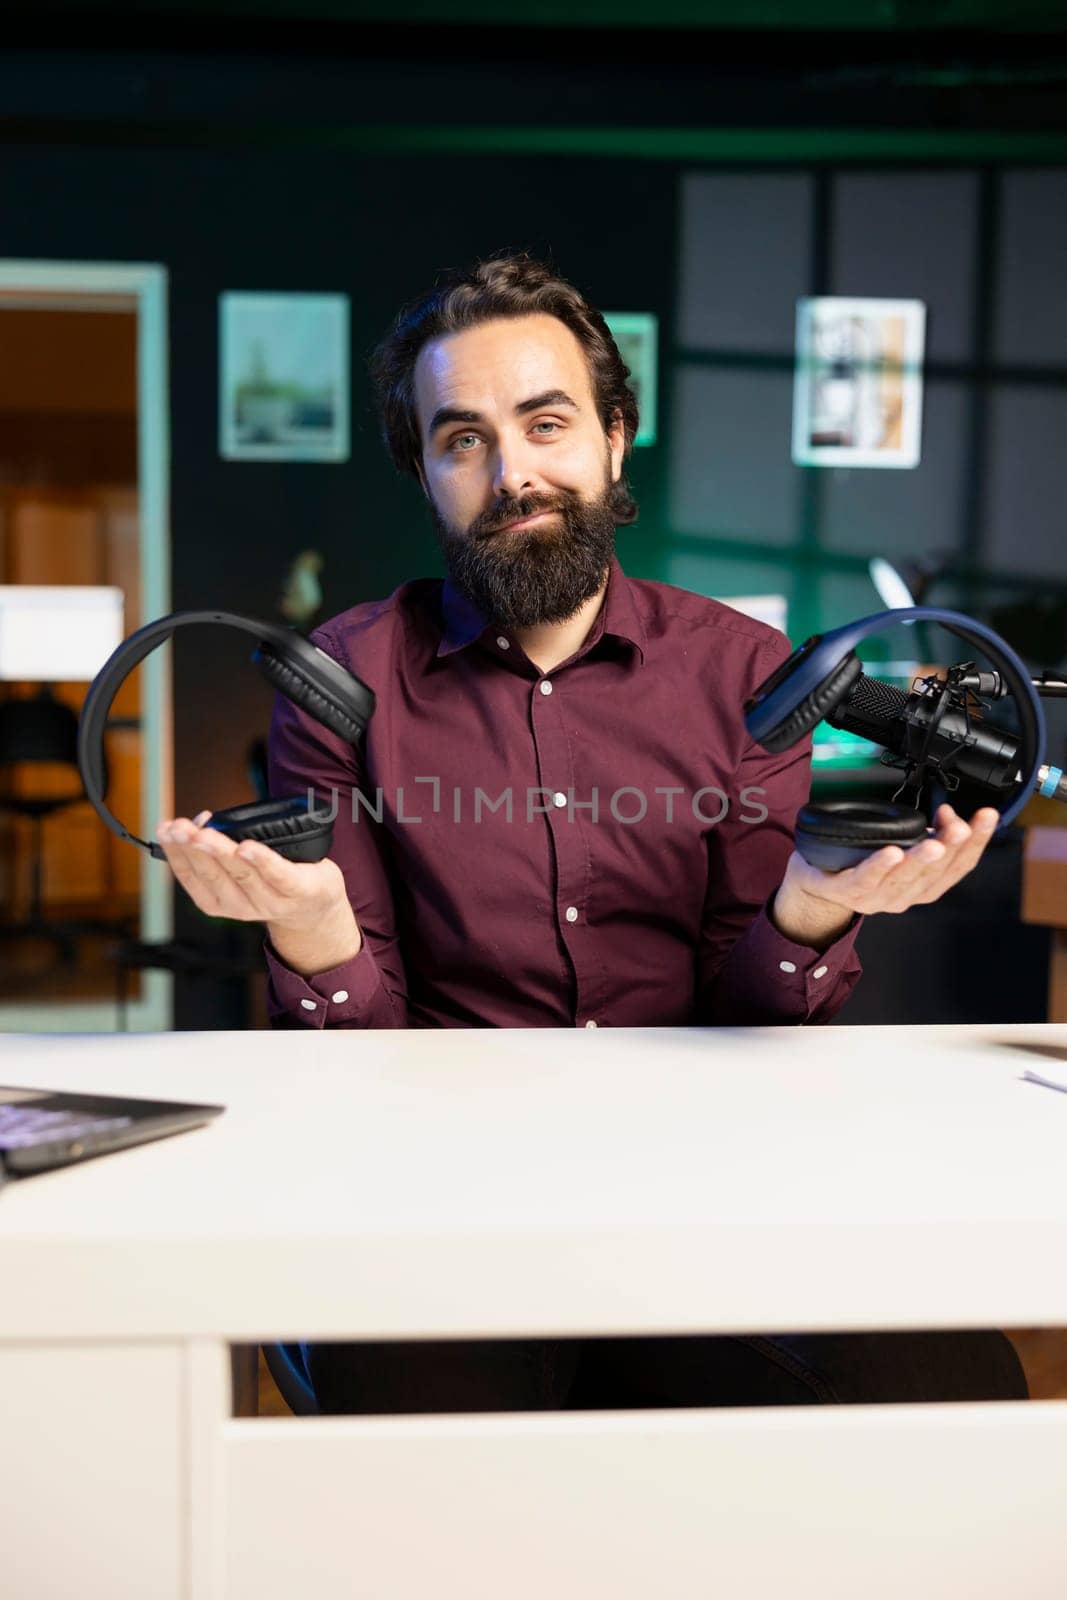 Content creator in neon lit home studio filming wireless headphones review for online streaming platforms. Media star hosts internet show, comparing music listening devices from different price ranges